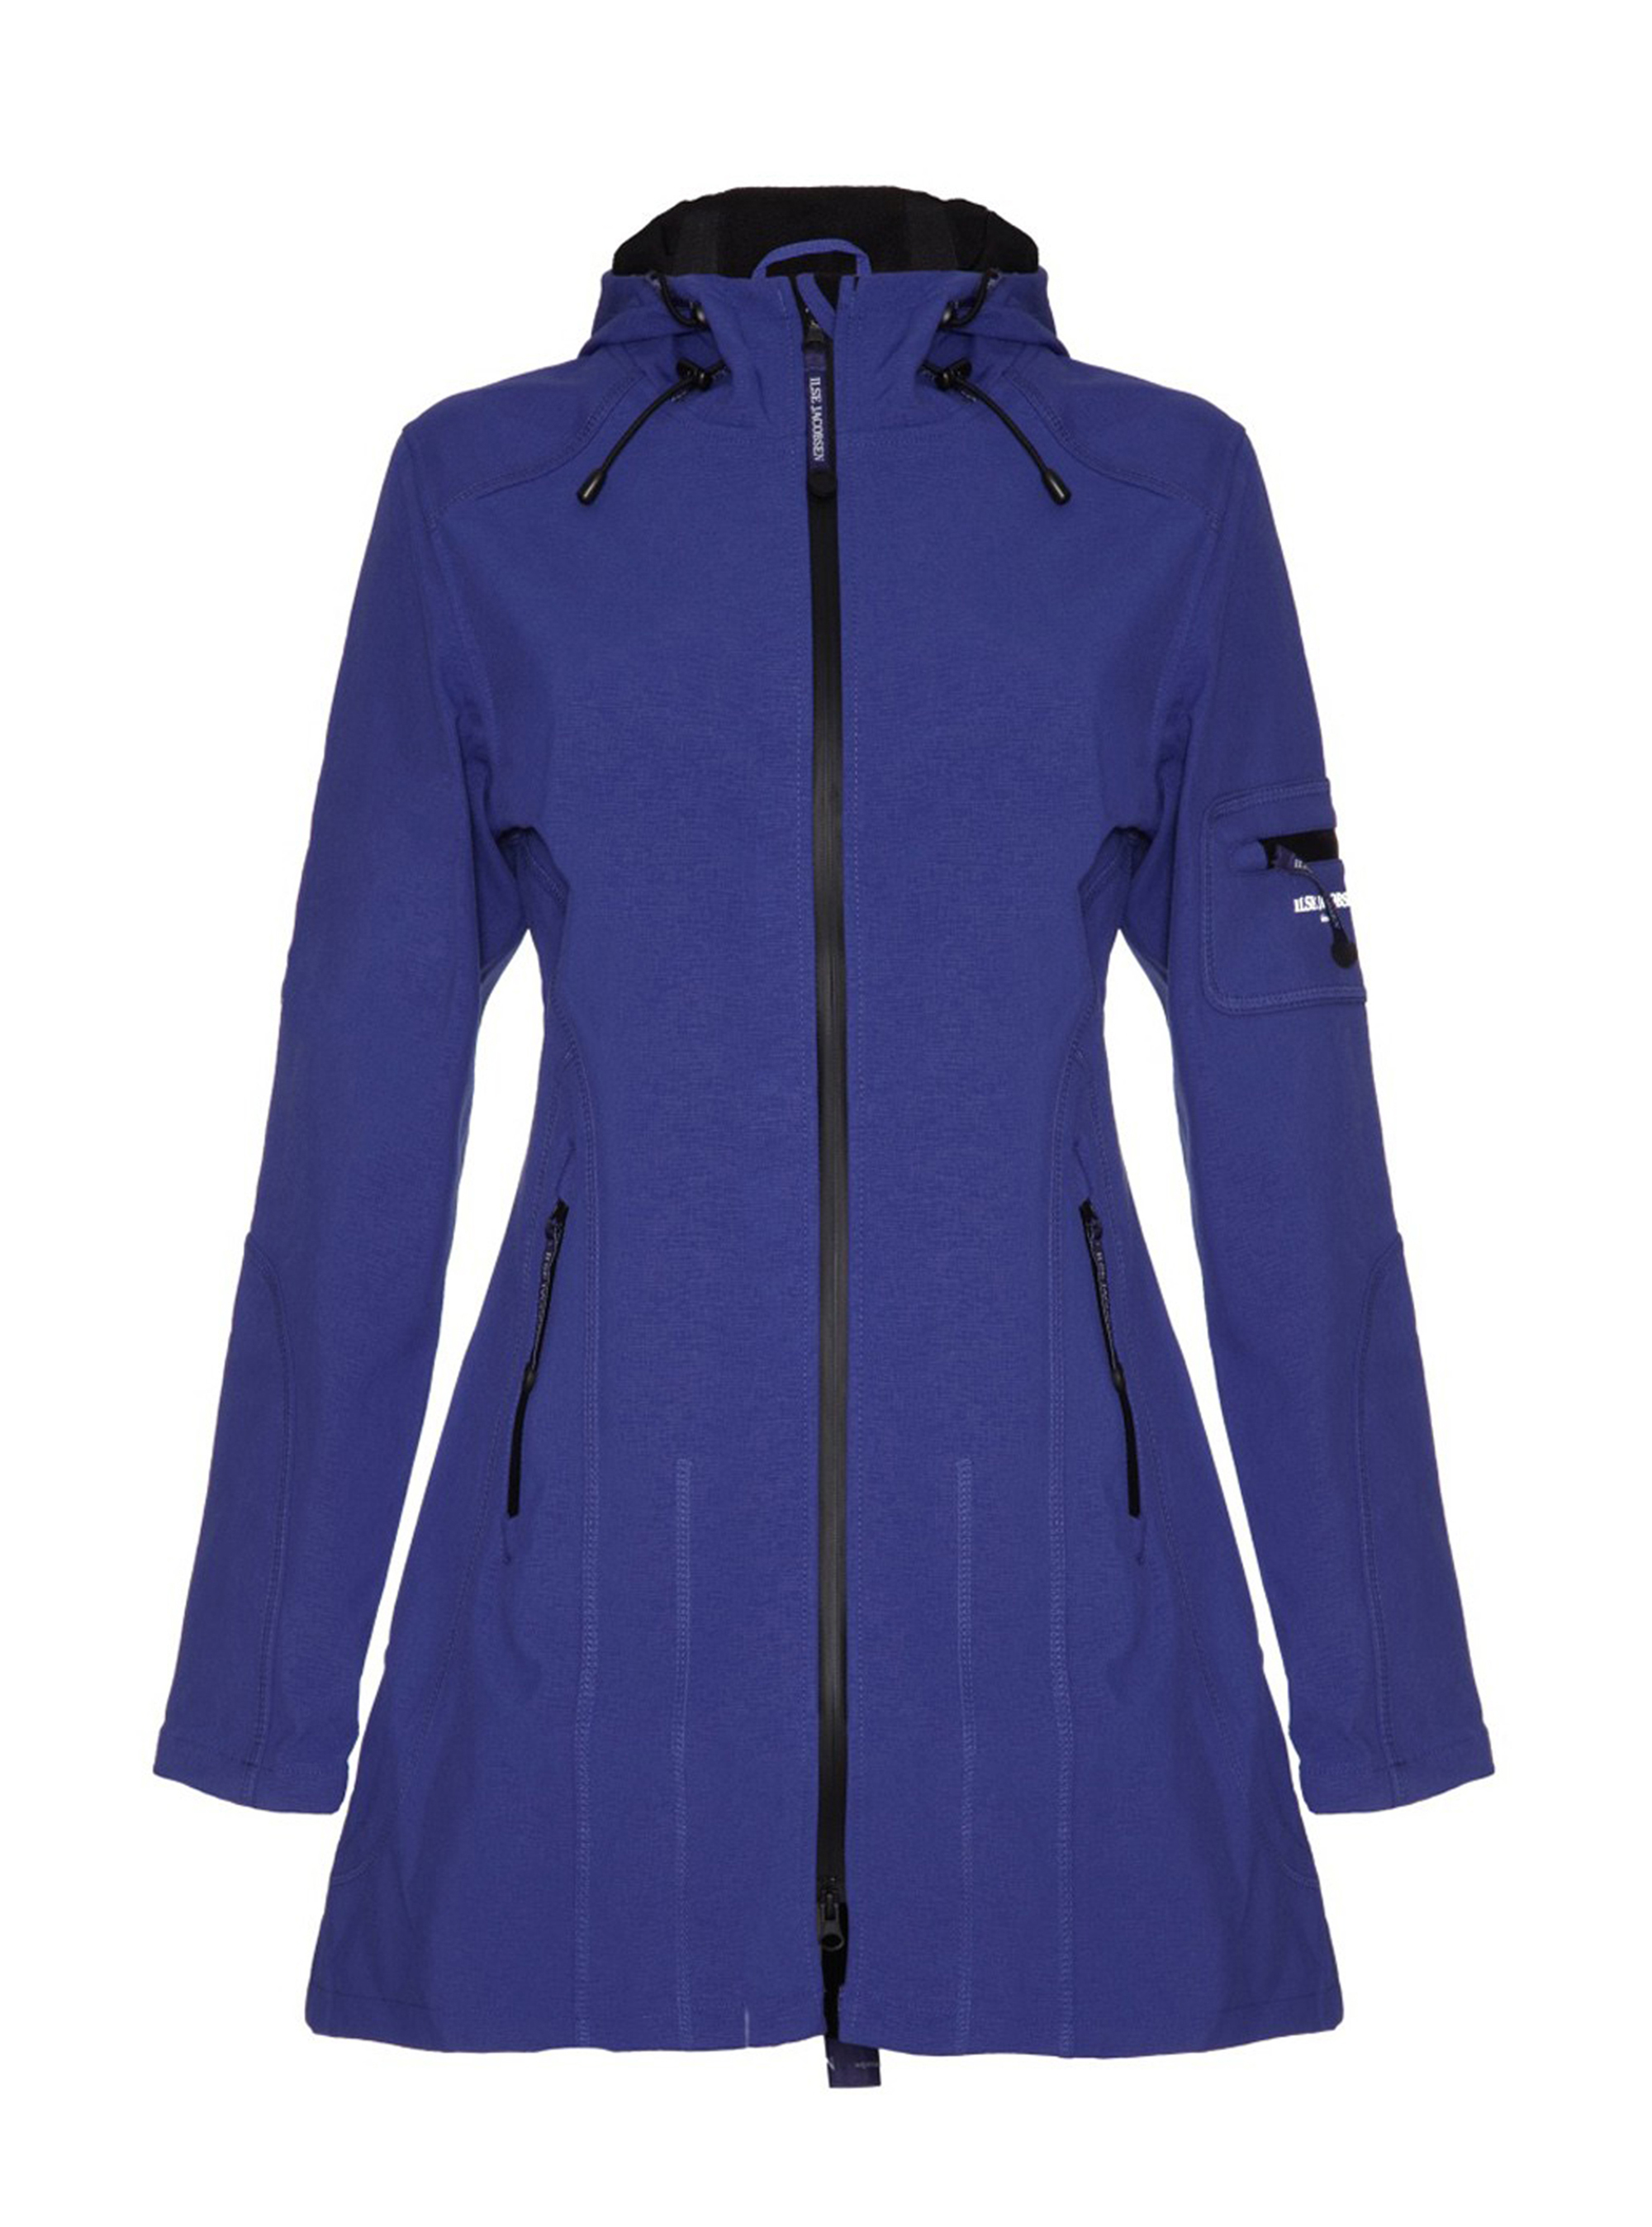 Ilse Jacobsen at Question Air Jacket, £165 - rainwear - Woman And Home